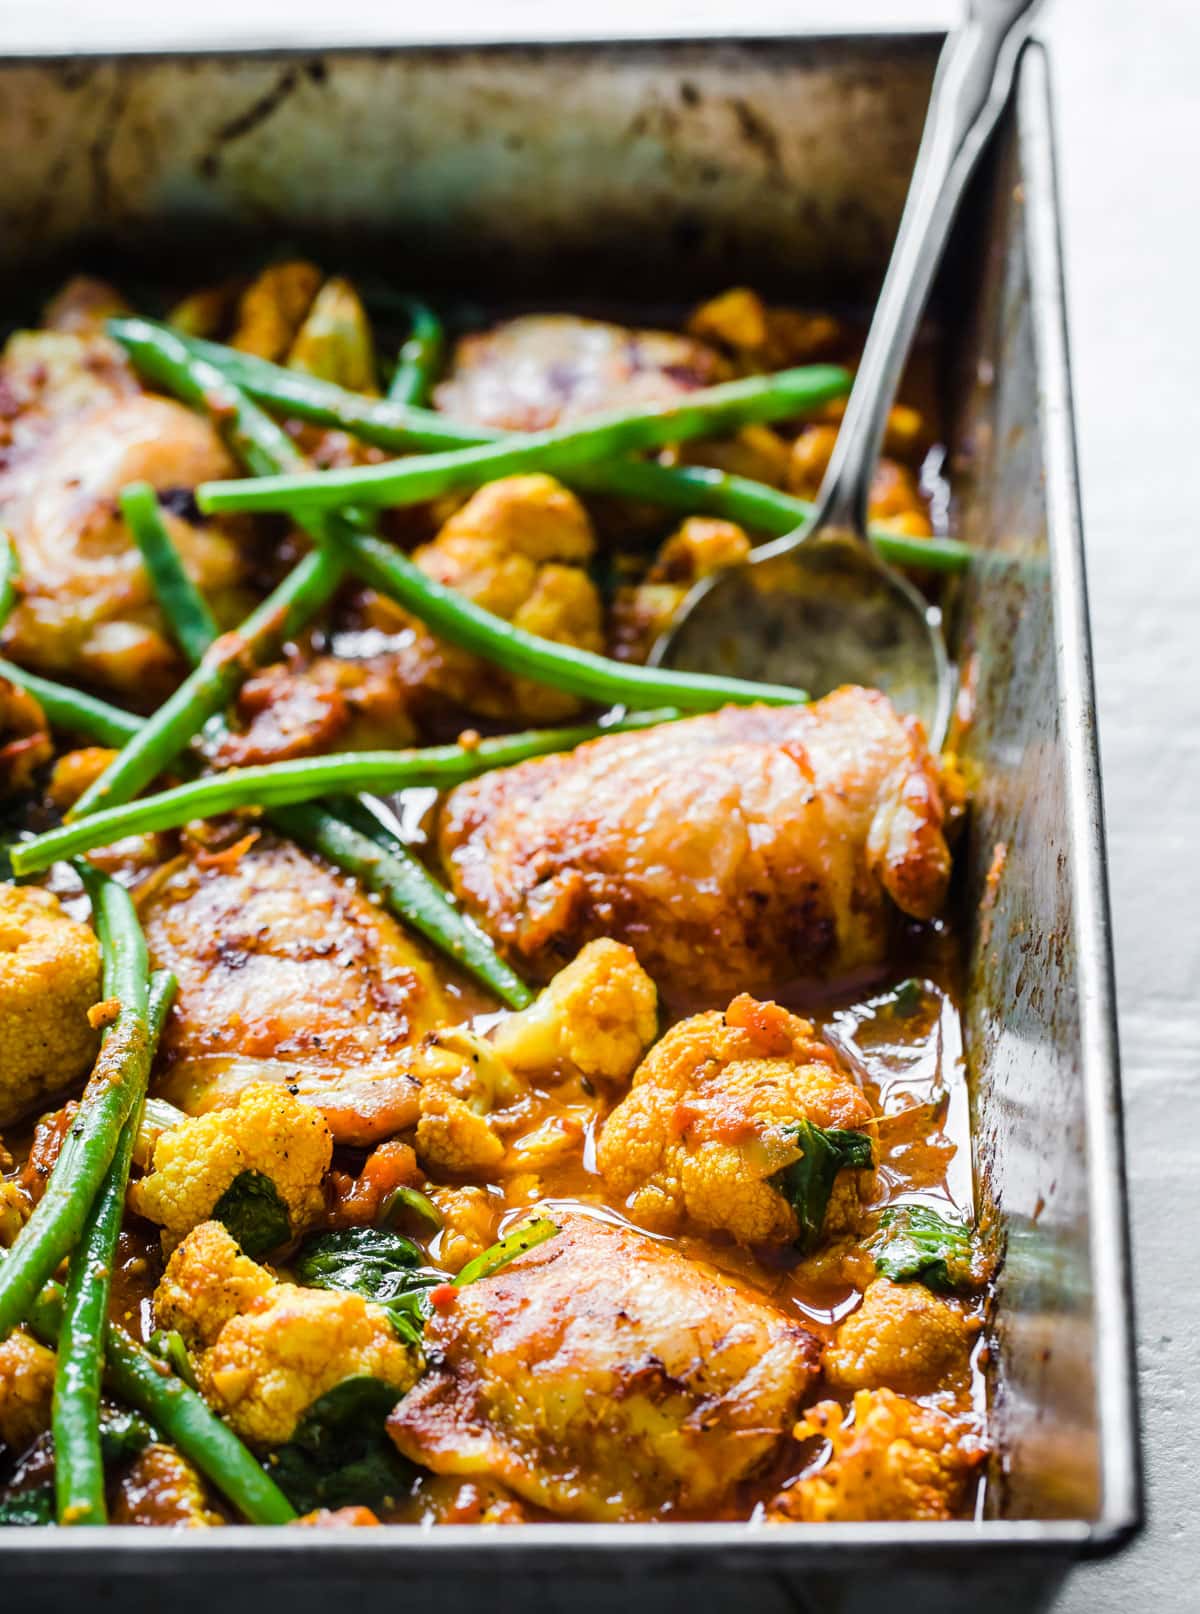 Roasted chicken thighs and cauliflower florets in a curry sauce and green beans.